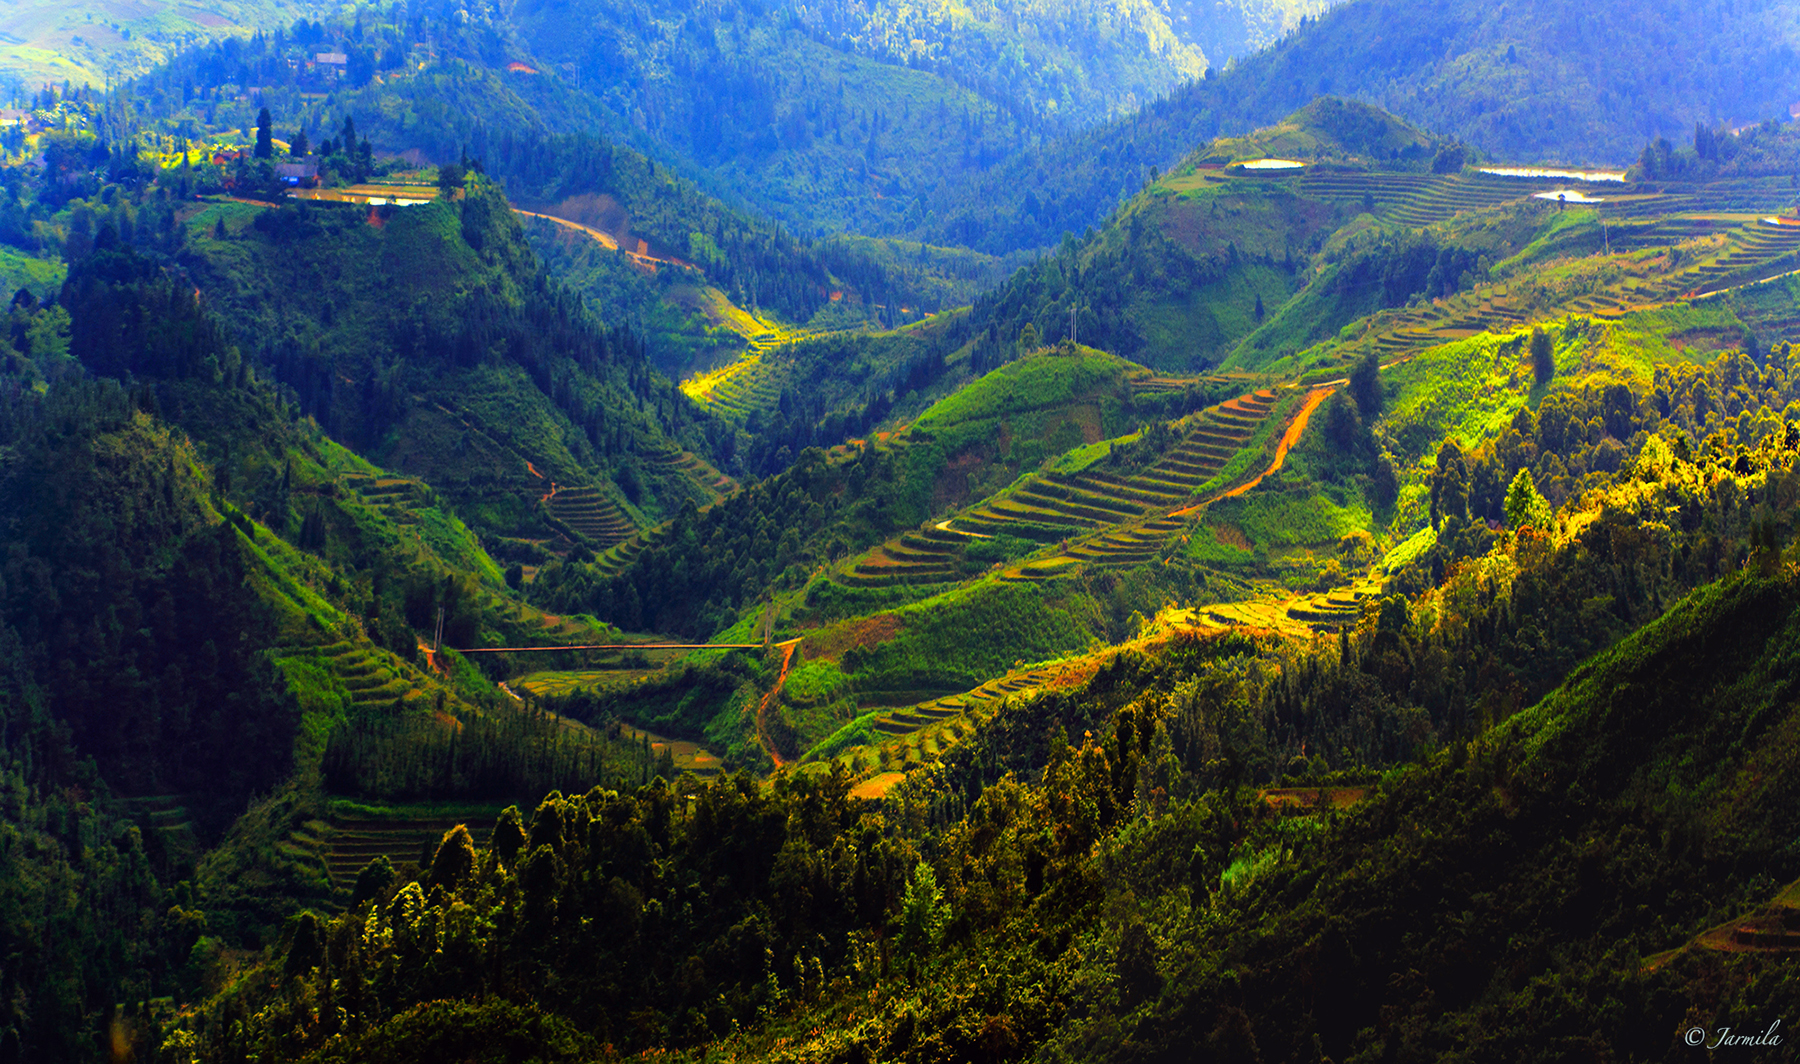 The charming of Sapa rice terraces...